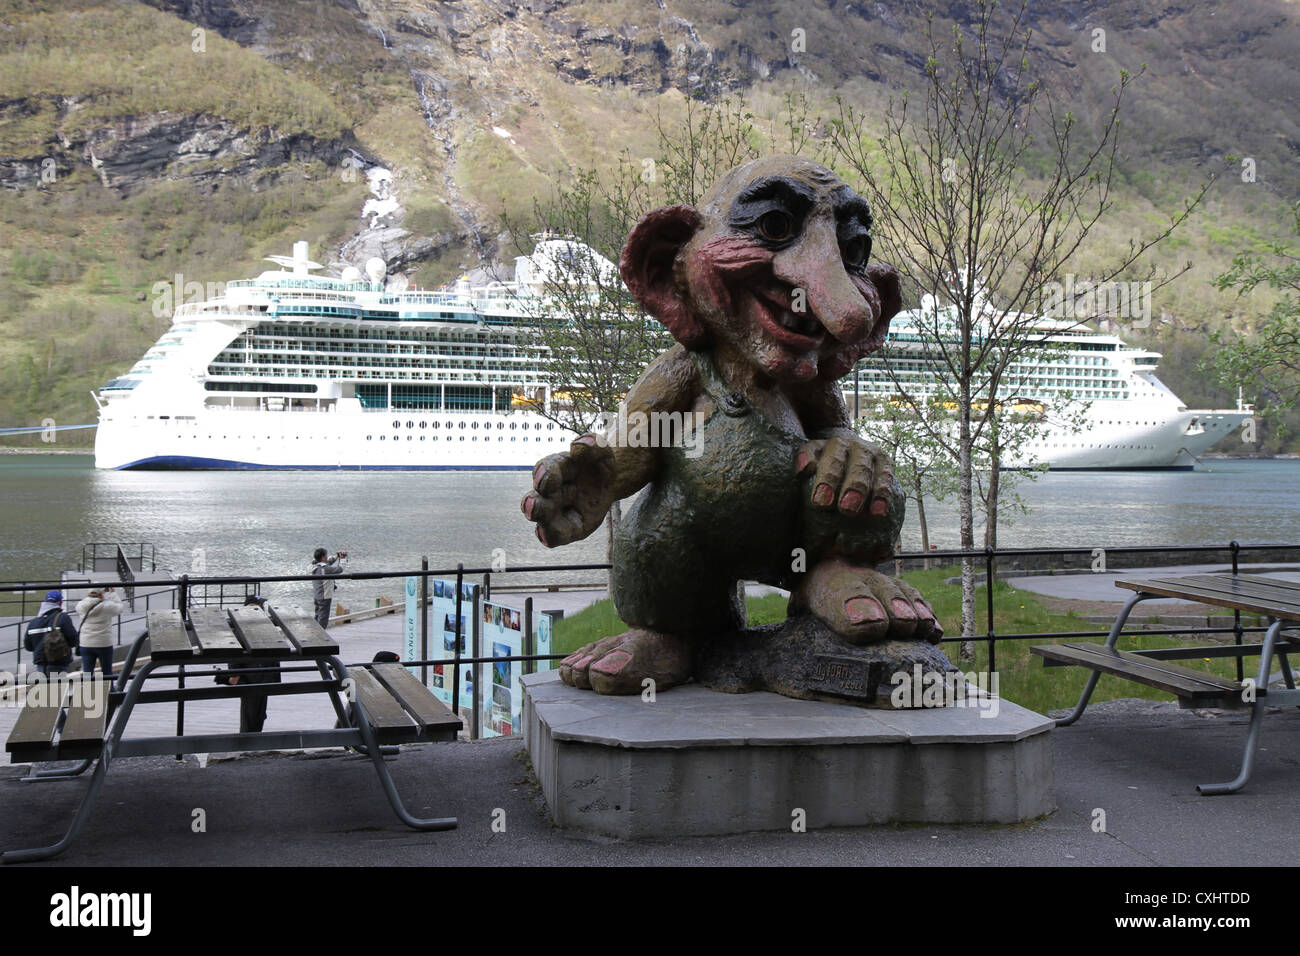 Statue of a troll in Geiranger, Norway, with a cruiseship in the background. Stock Photo